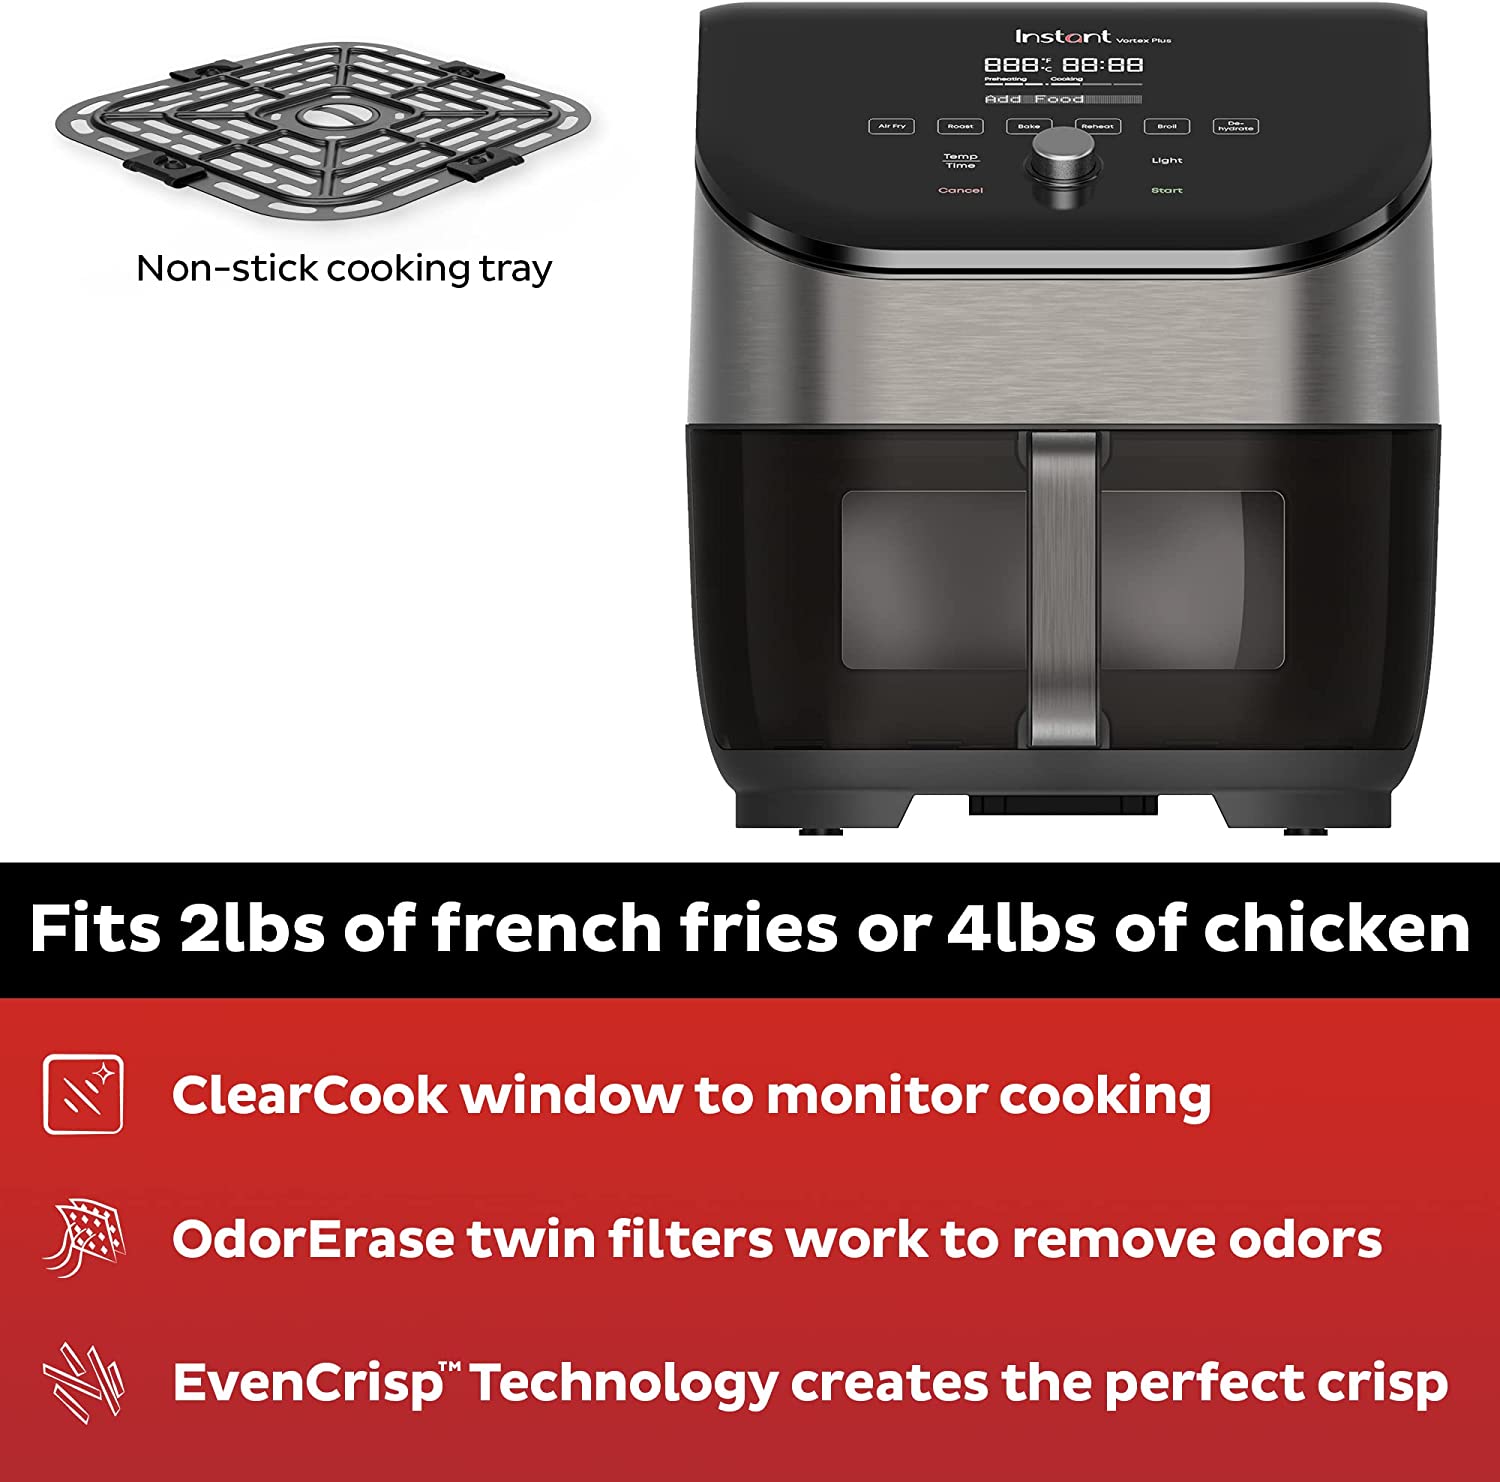 https://discounttoday.net/wp-content/uploads/2023/01/Instant-Vortex-Plus-6-Quart-Air-Fryer-Oven-From-the-Makers-of-Instant-Pot-with-Odor-Erase-Technology-ClearCook-Cooking-Window-App-with-over-100-Recipes-Single-Basket-Stainless-Steel1.jpg